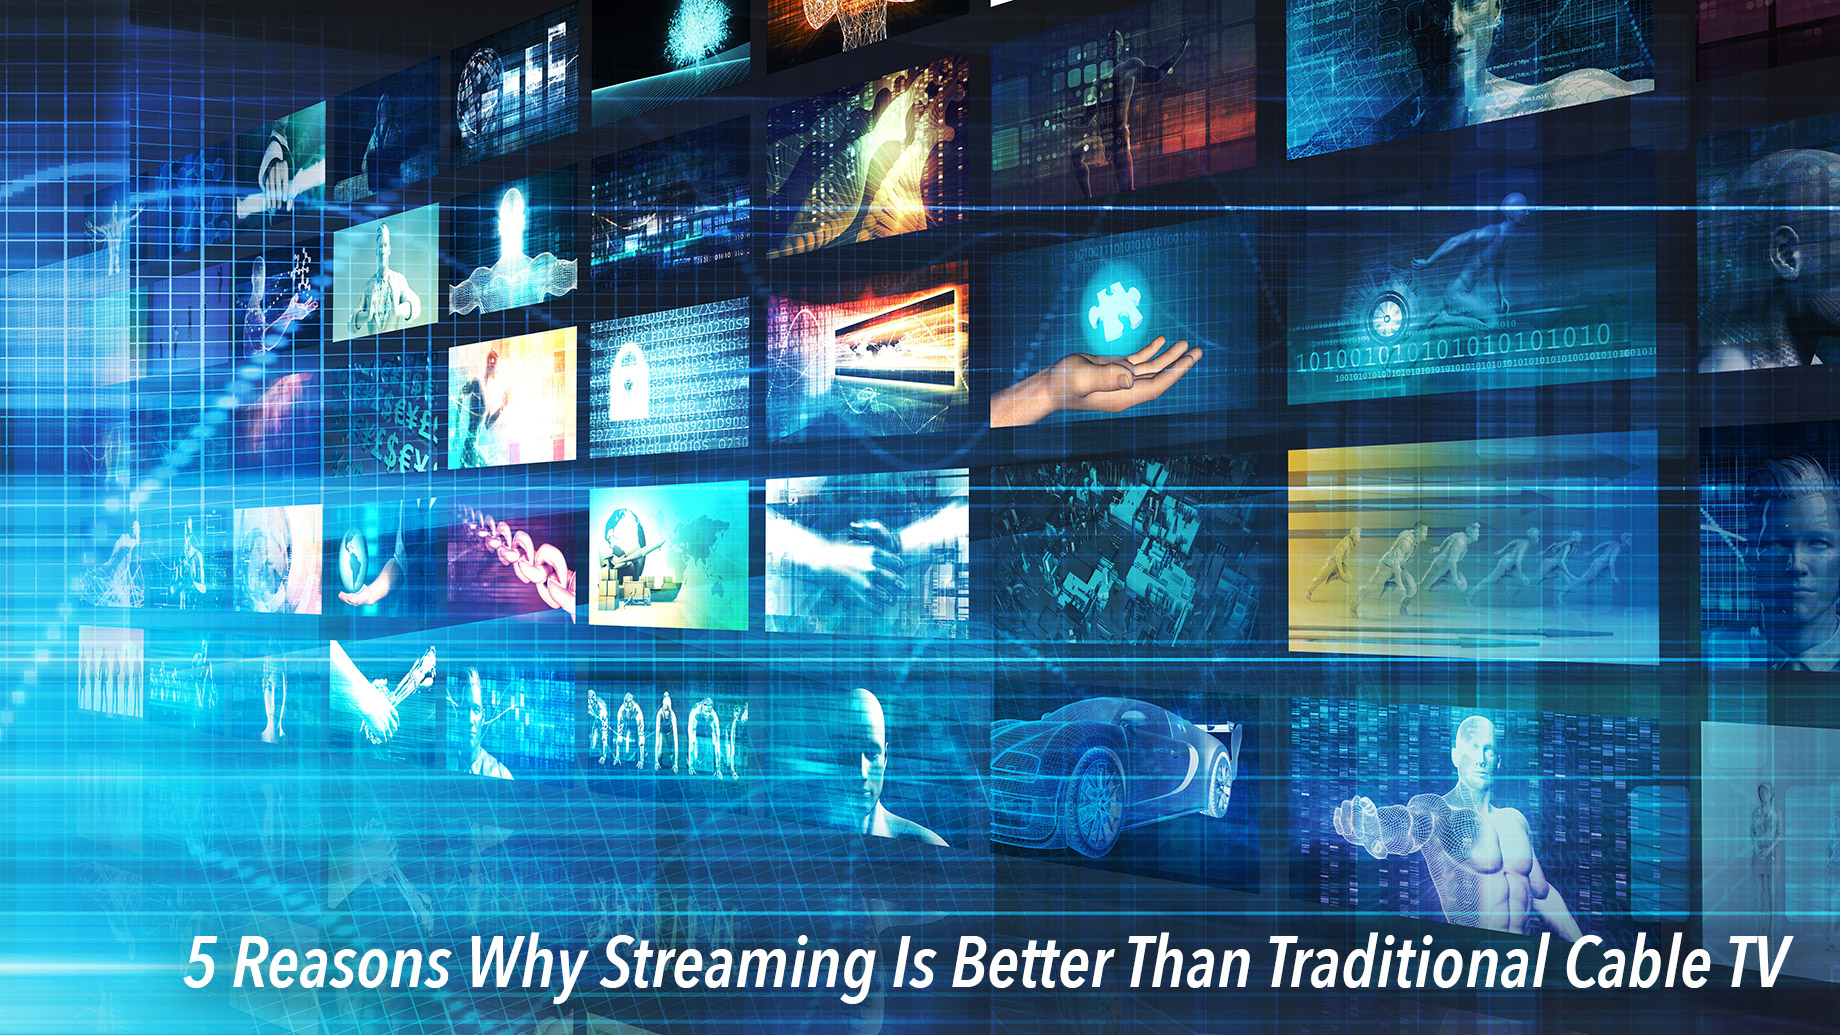 5 Reasons Why Streaming Is Better Than Traditional Cable TV